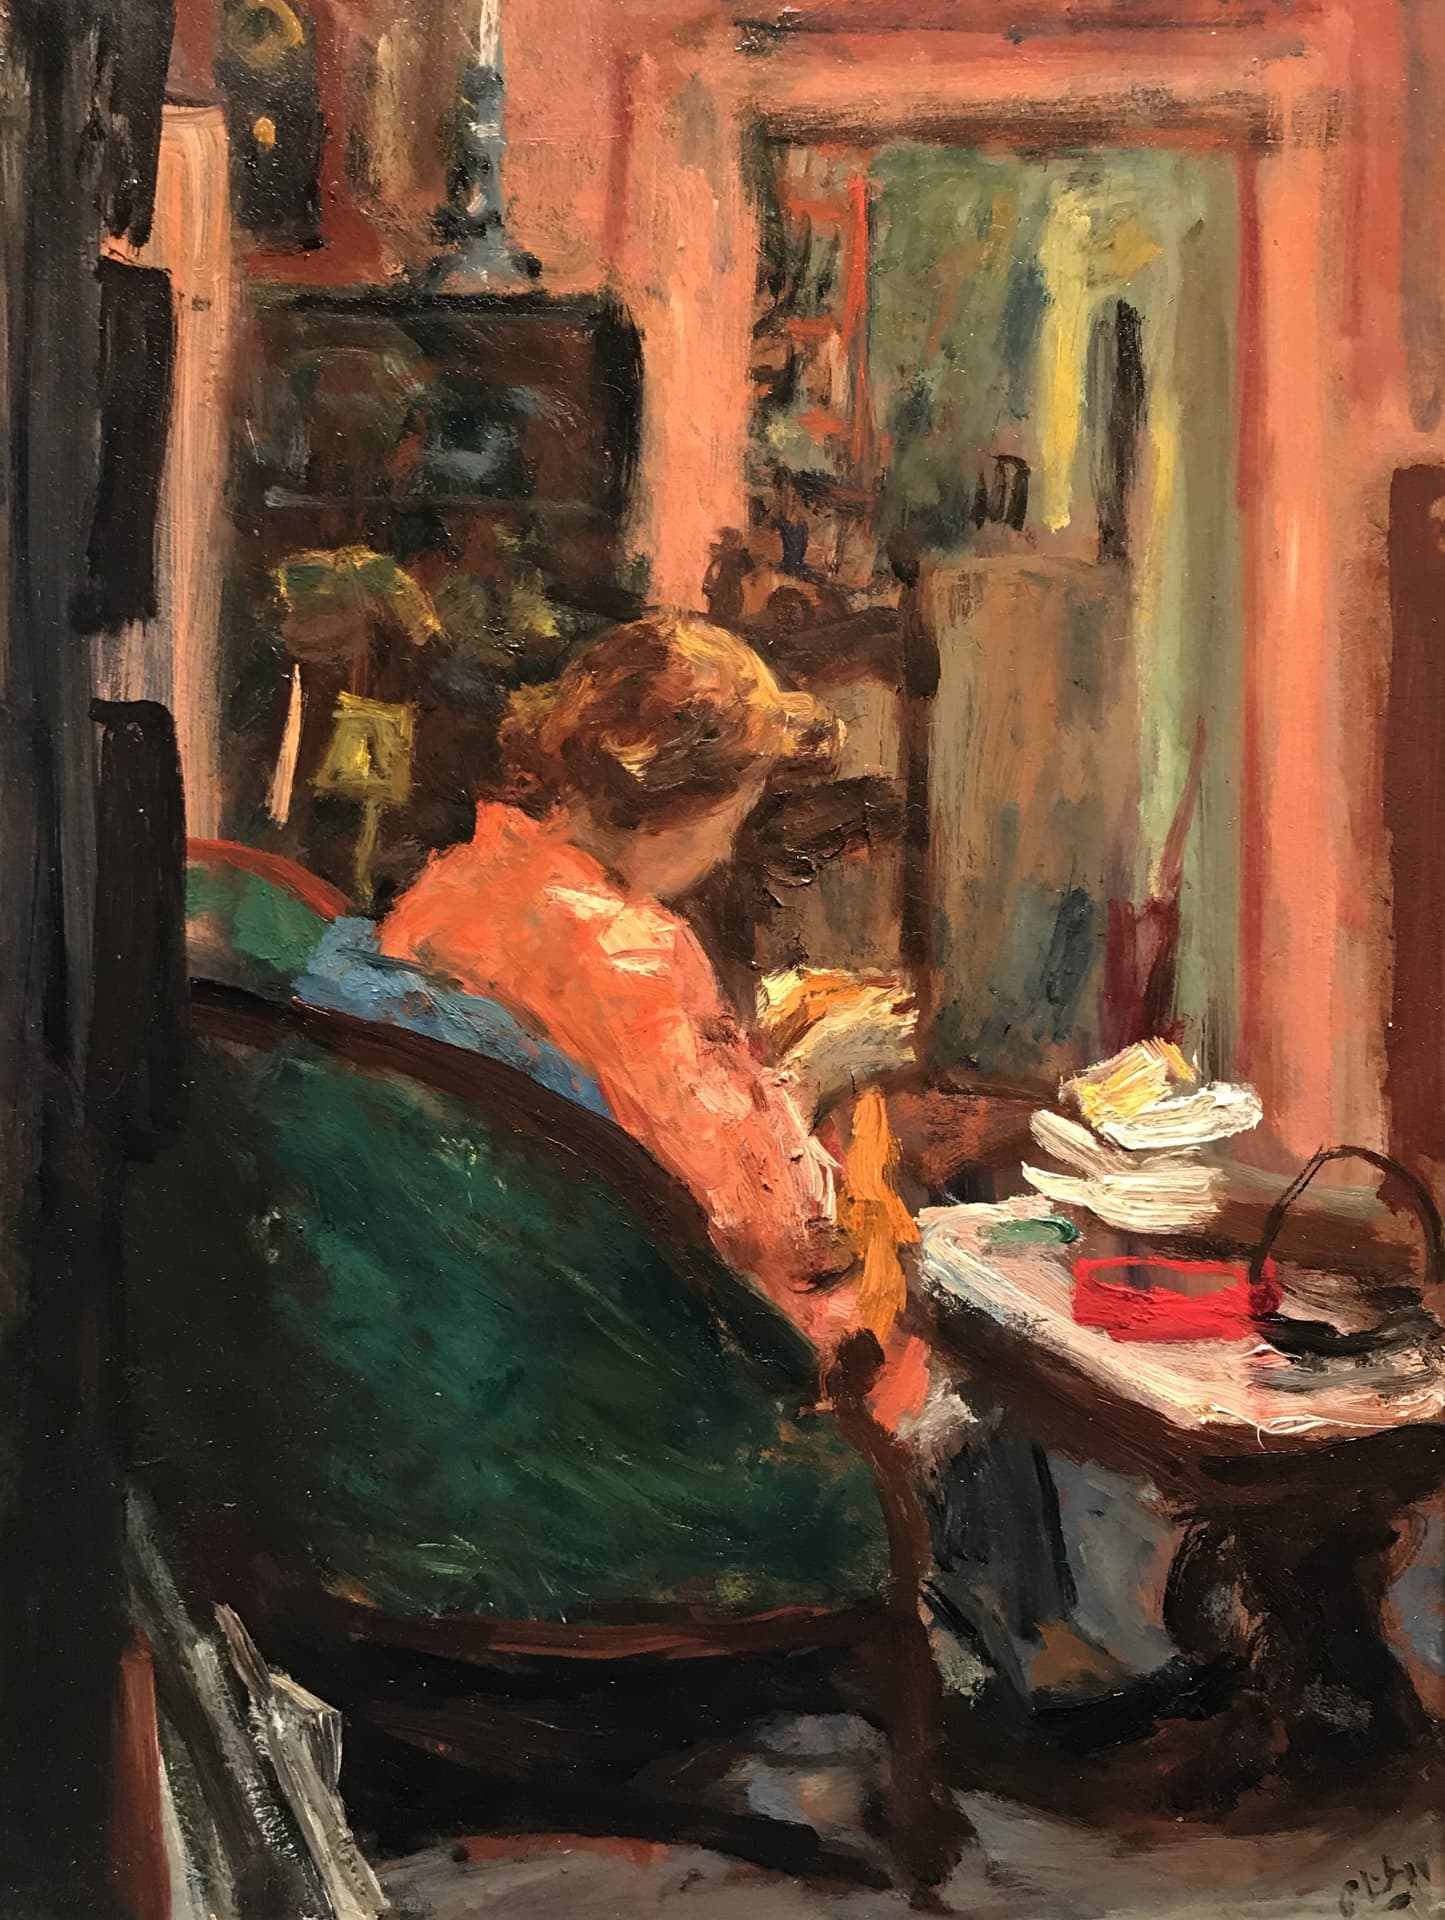 Robert Philipp's Quiet Time. A mature woman sits on a tall backed green couch, facing away from the viewer, stitching or knitting yellow fabric. The room is full but cozy. Darker colors.